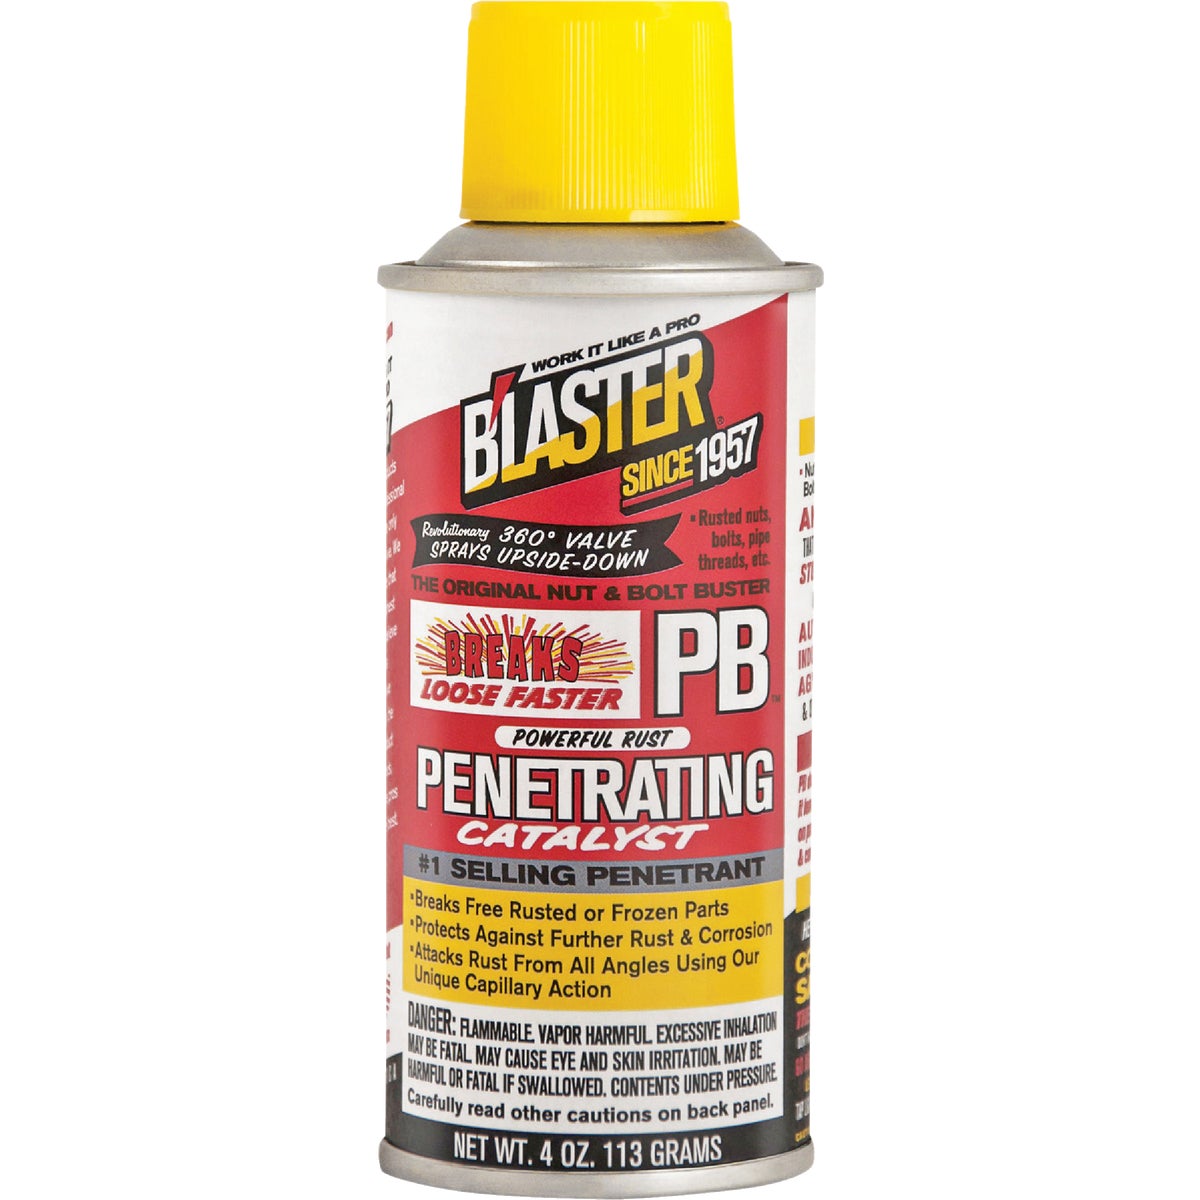 Item 574600, The PB Blaster acts as a powerful, concentrated catalyst to release the 